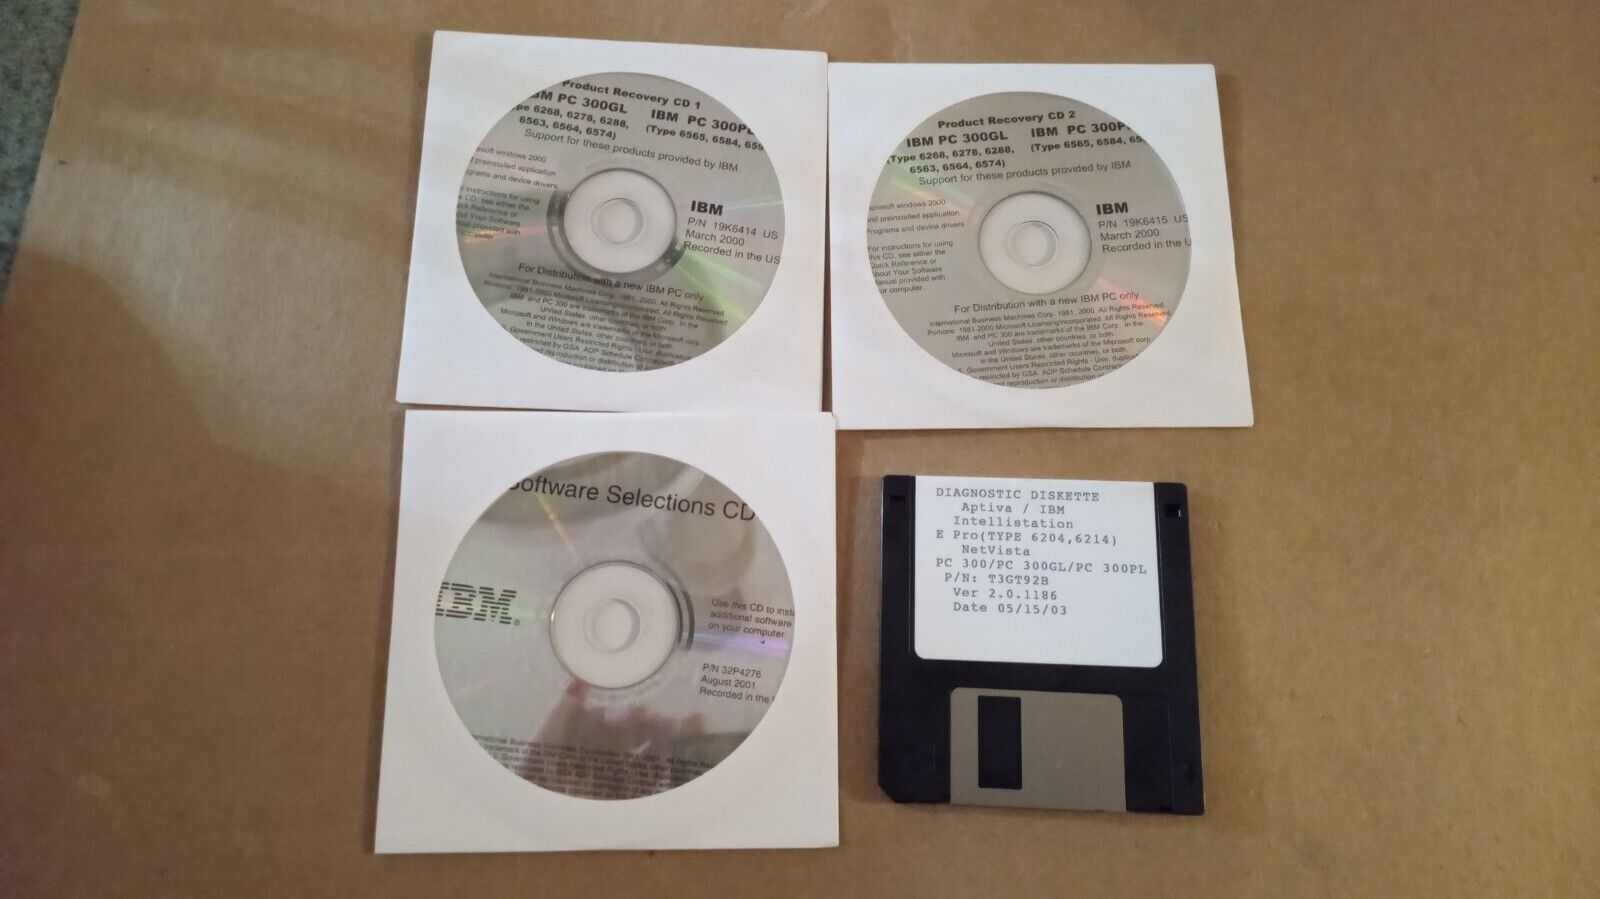 IBM PC 300GL 300PL - 3 Disk Product Recovery CD Set. With Diagnostic Diskette.